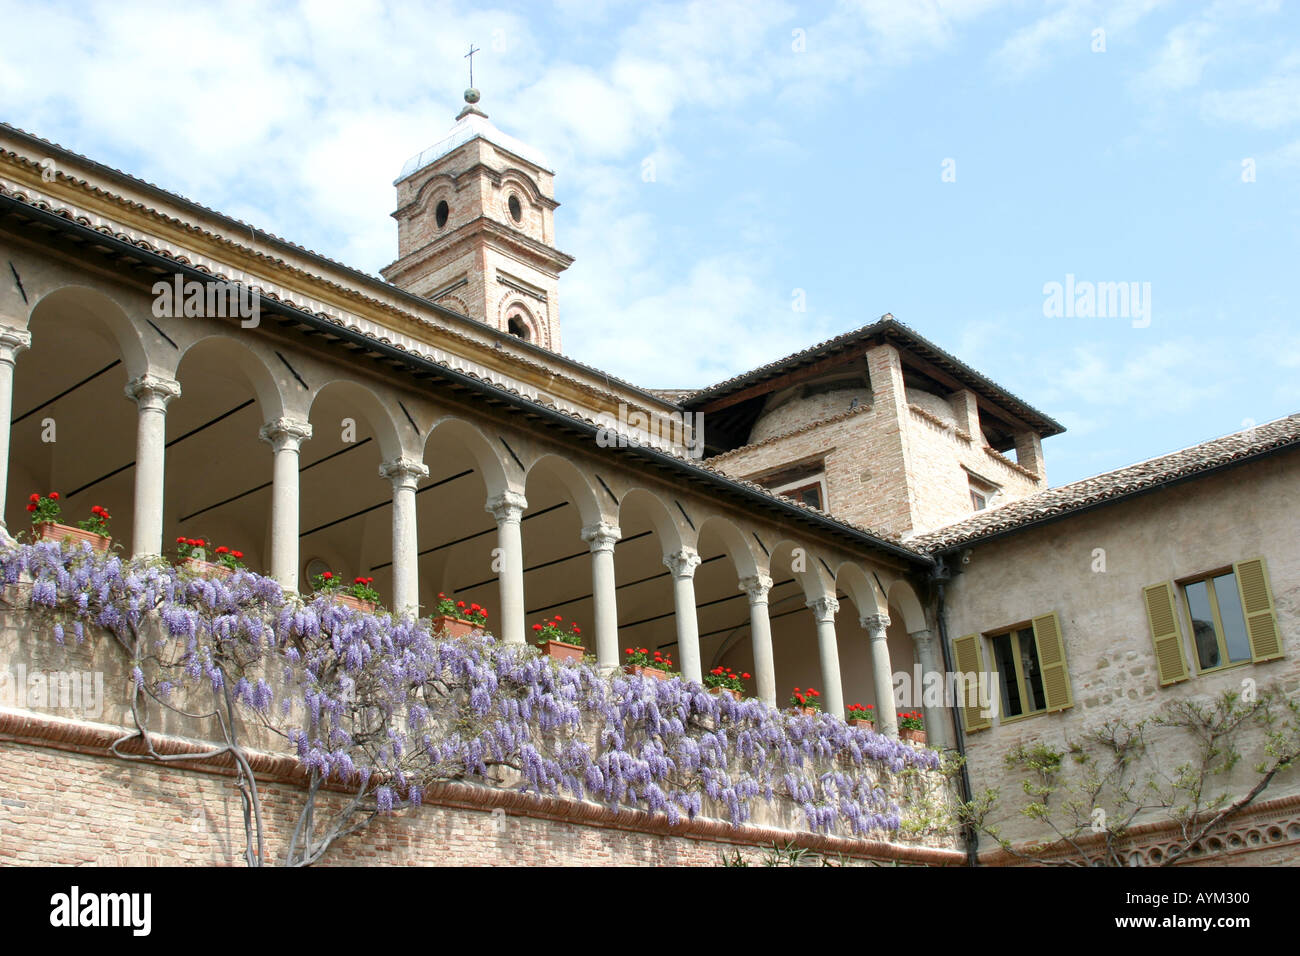 Flowered cloisters and tower of the St Nicholas church in Tolentino Le Marche Italy Stock Photo